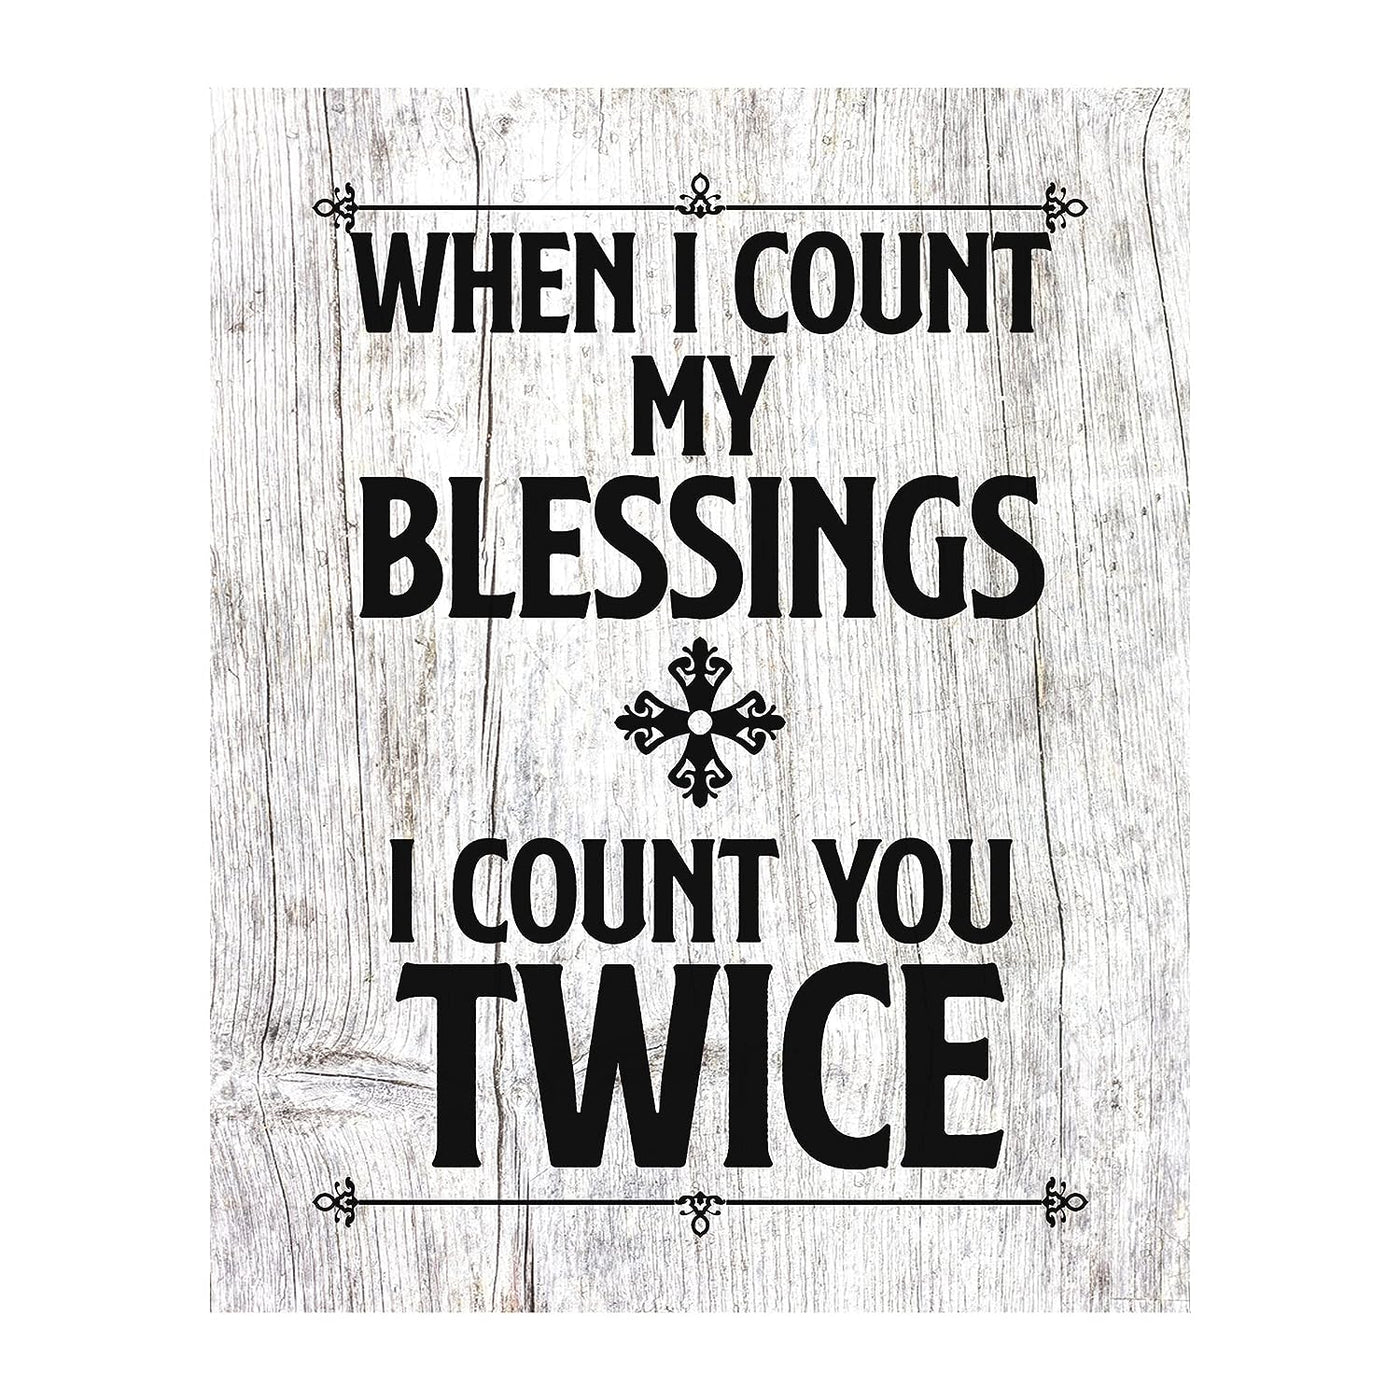 When I Count My Blessings-Count You Twice Inspirational Quotes Wall Art -8x10" Rustic Love Print-Ready to Frame. Romantic Home-Bedroom-Wedding Decor. Great Gift for Couples! Printed on Photo Paper.